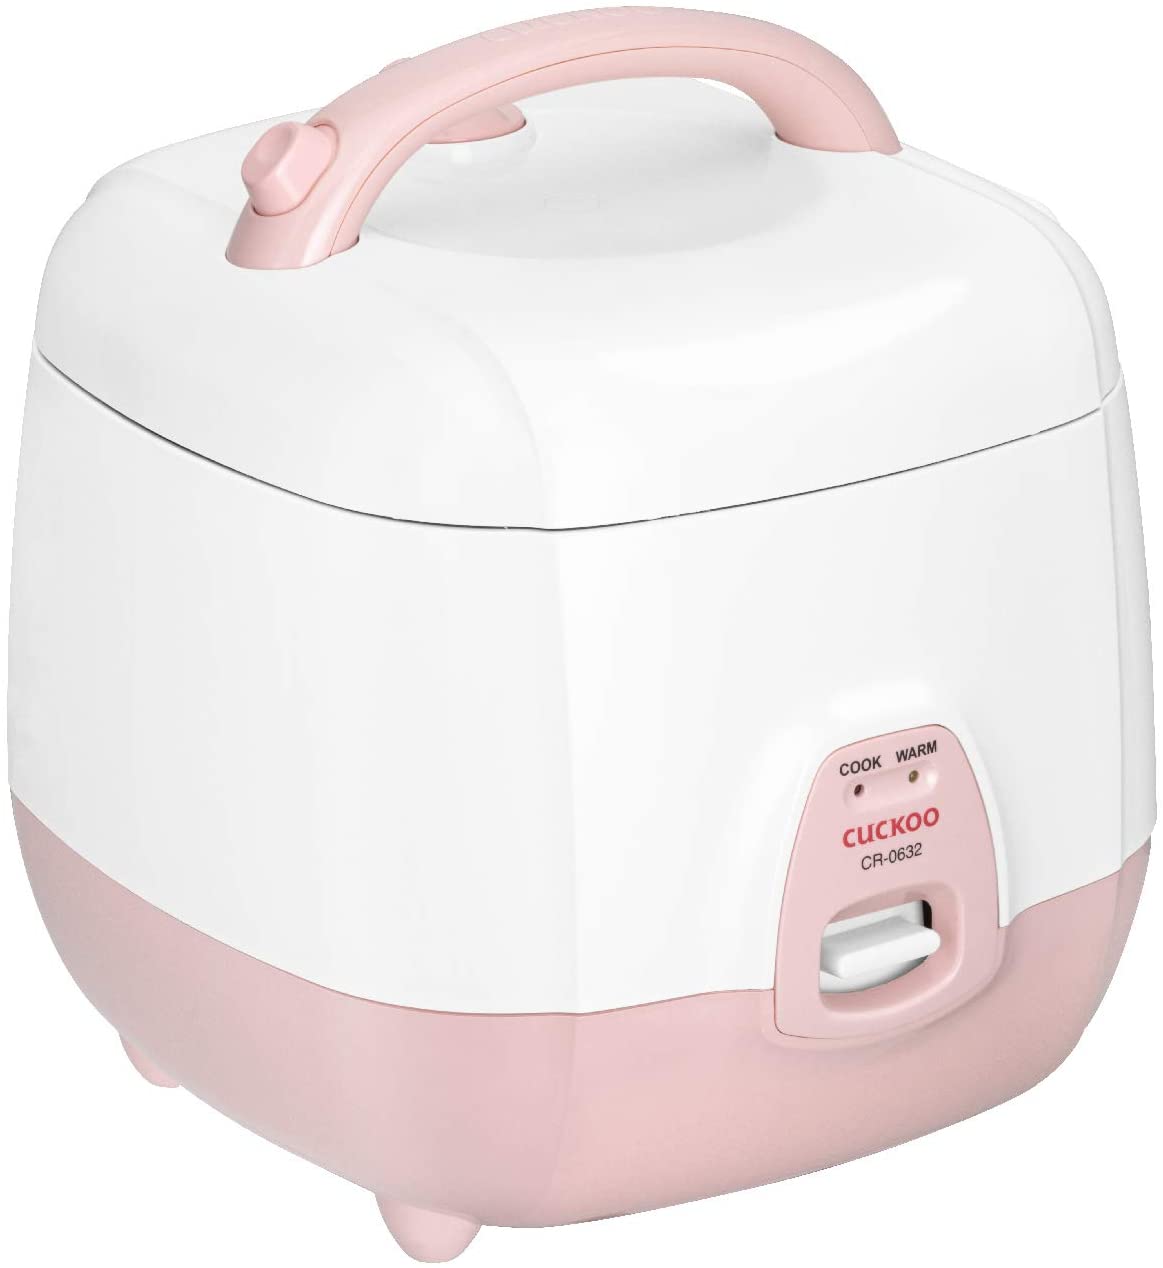 Cuckoo T07-13-0036 Rice Cooker 1.08 Litres White / Pink